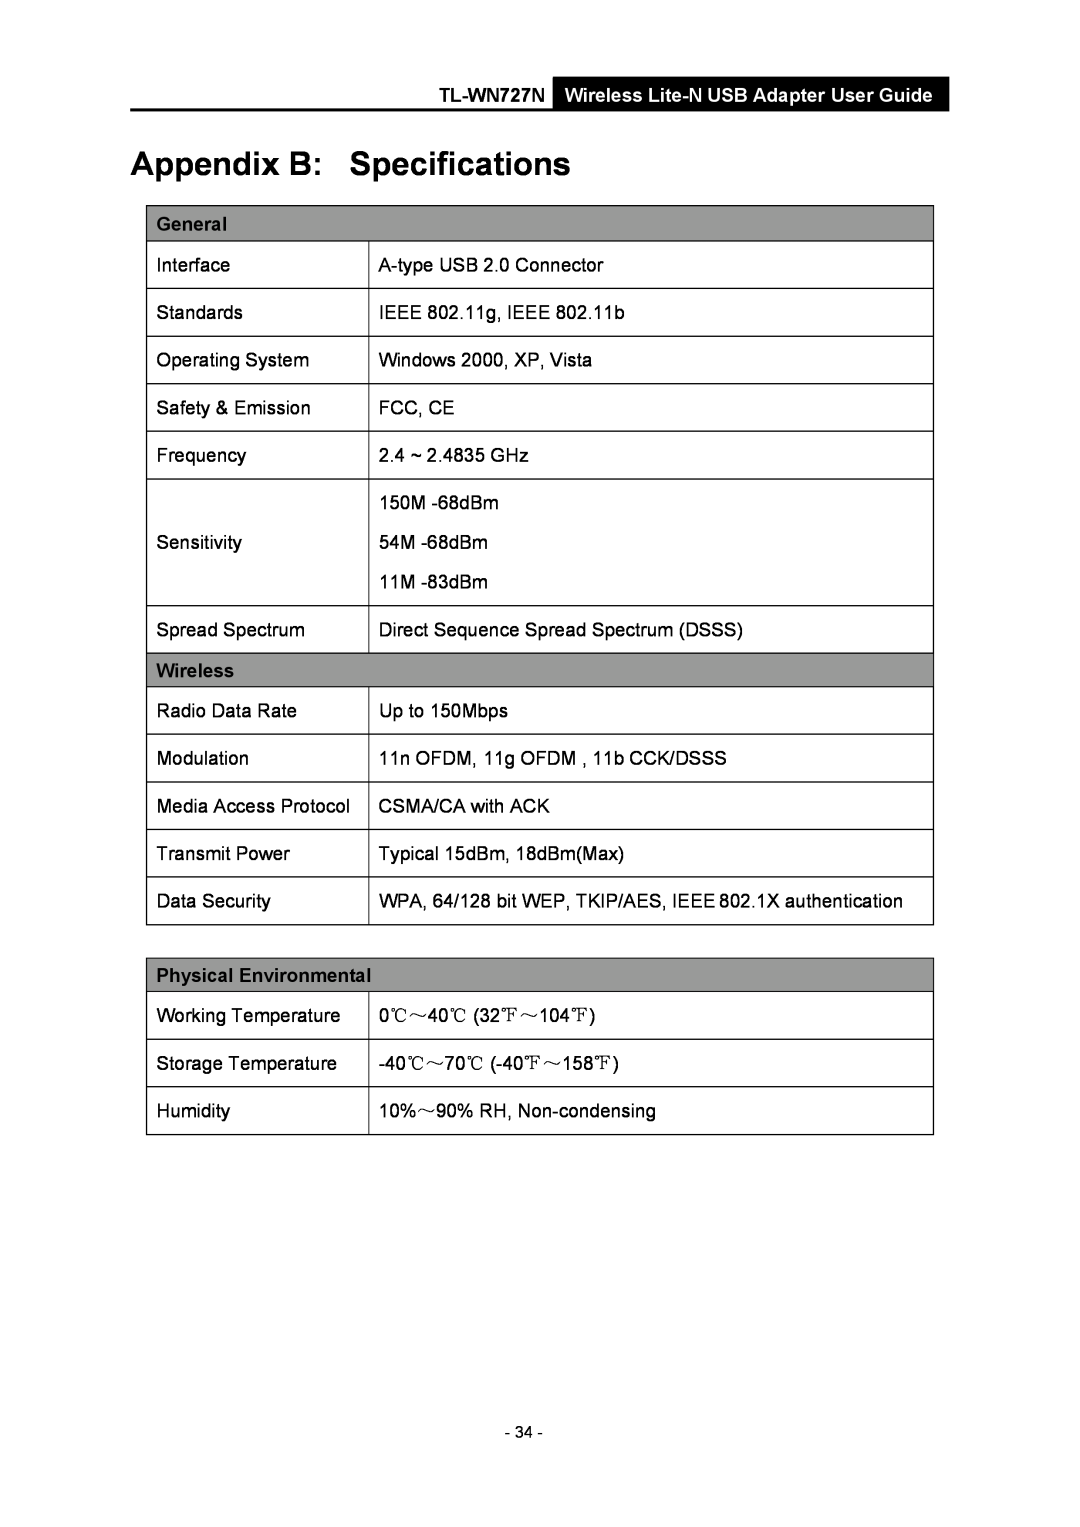 Vizio TL-WN727N manual Appendix B Specifications, Wireless Lite-N USB Adapter User Guide, General, Physical Environmental 